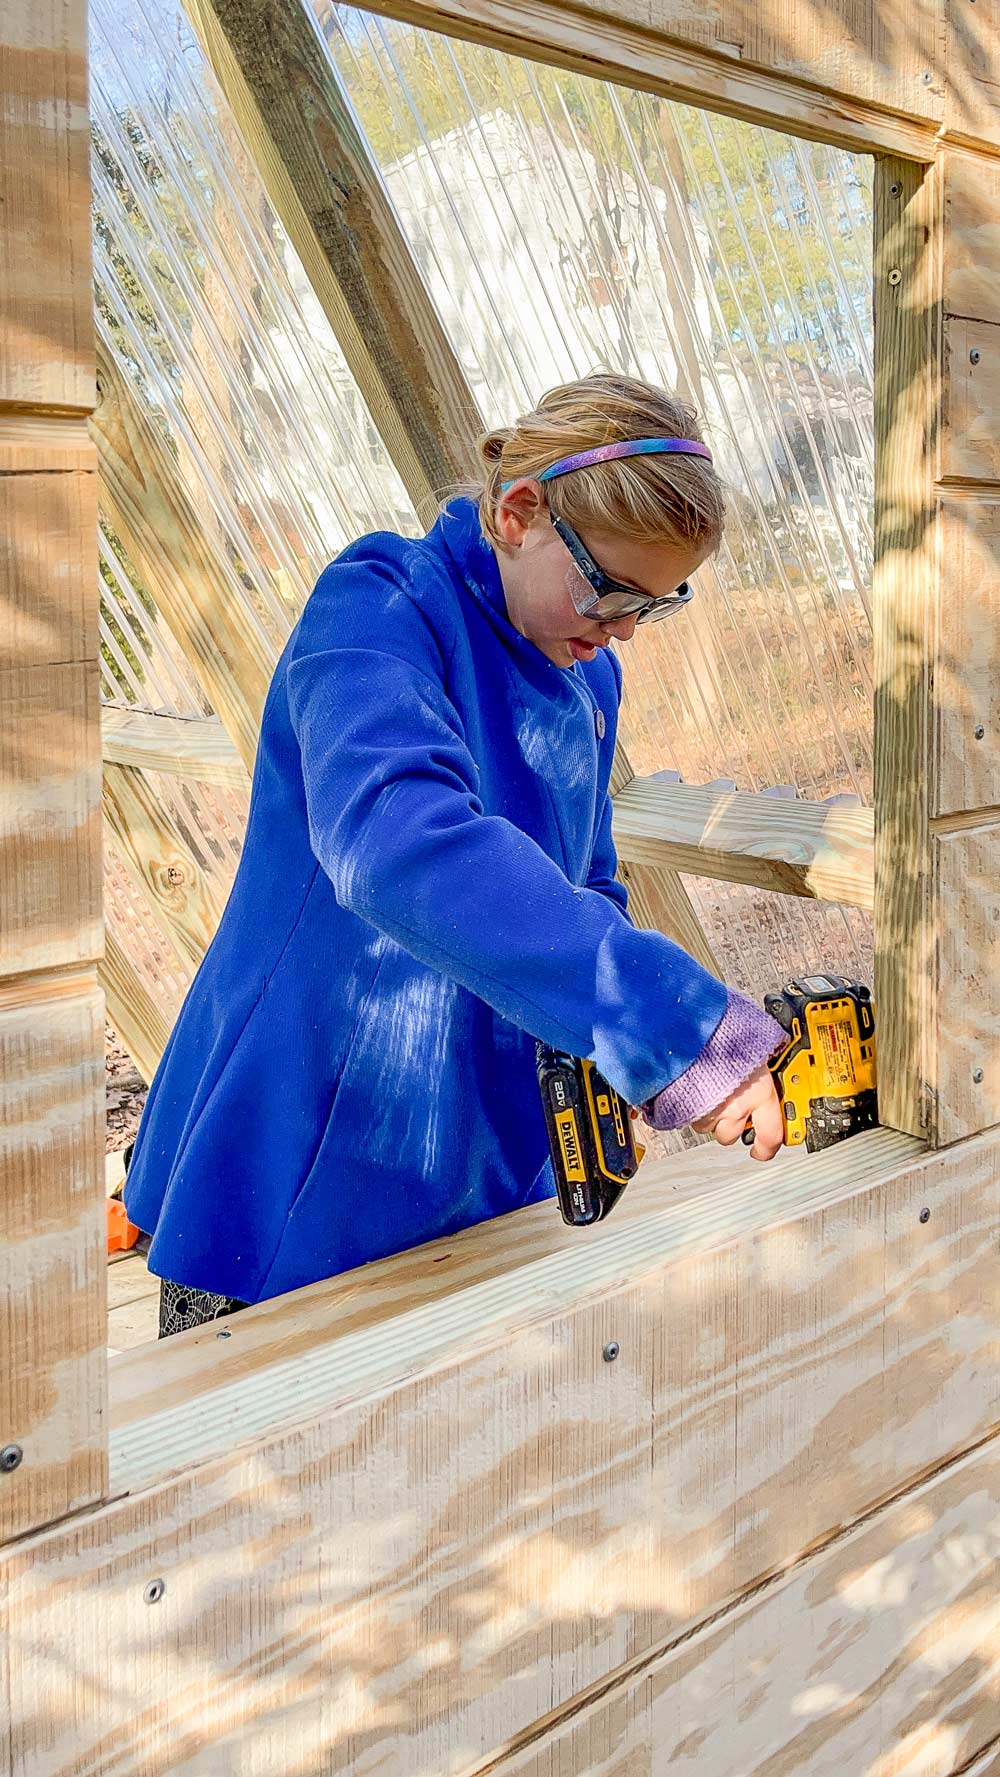 Woman in a blue jacket using a power tool.